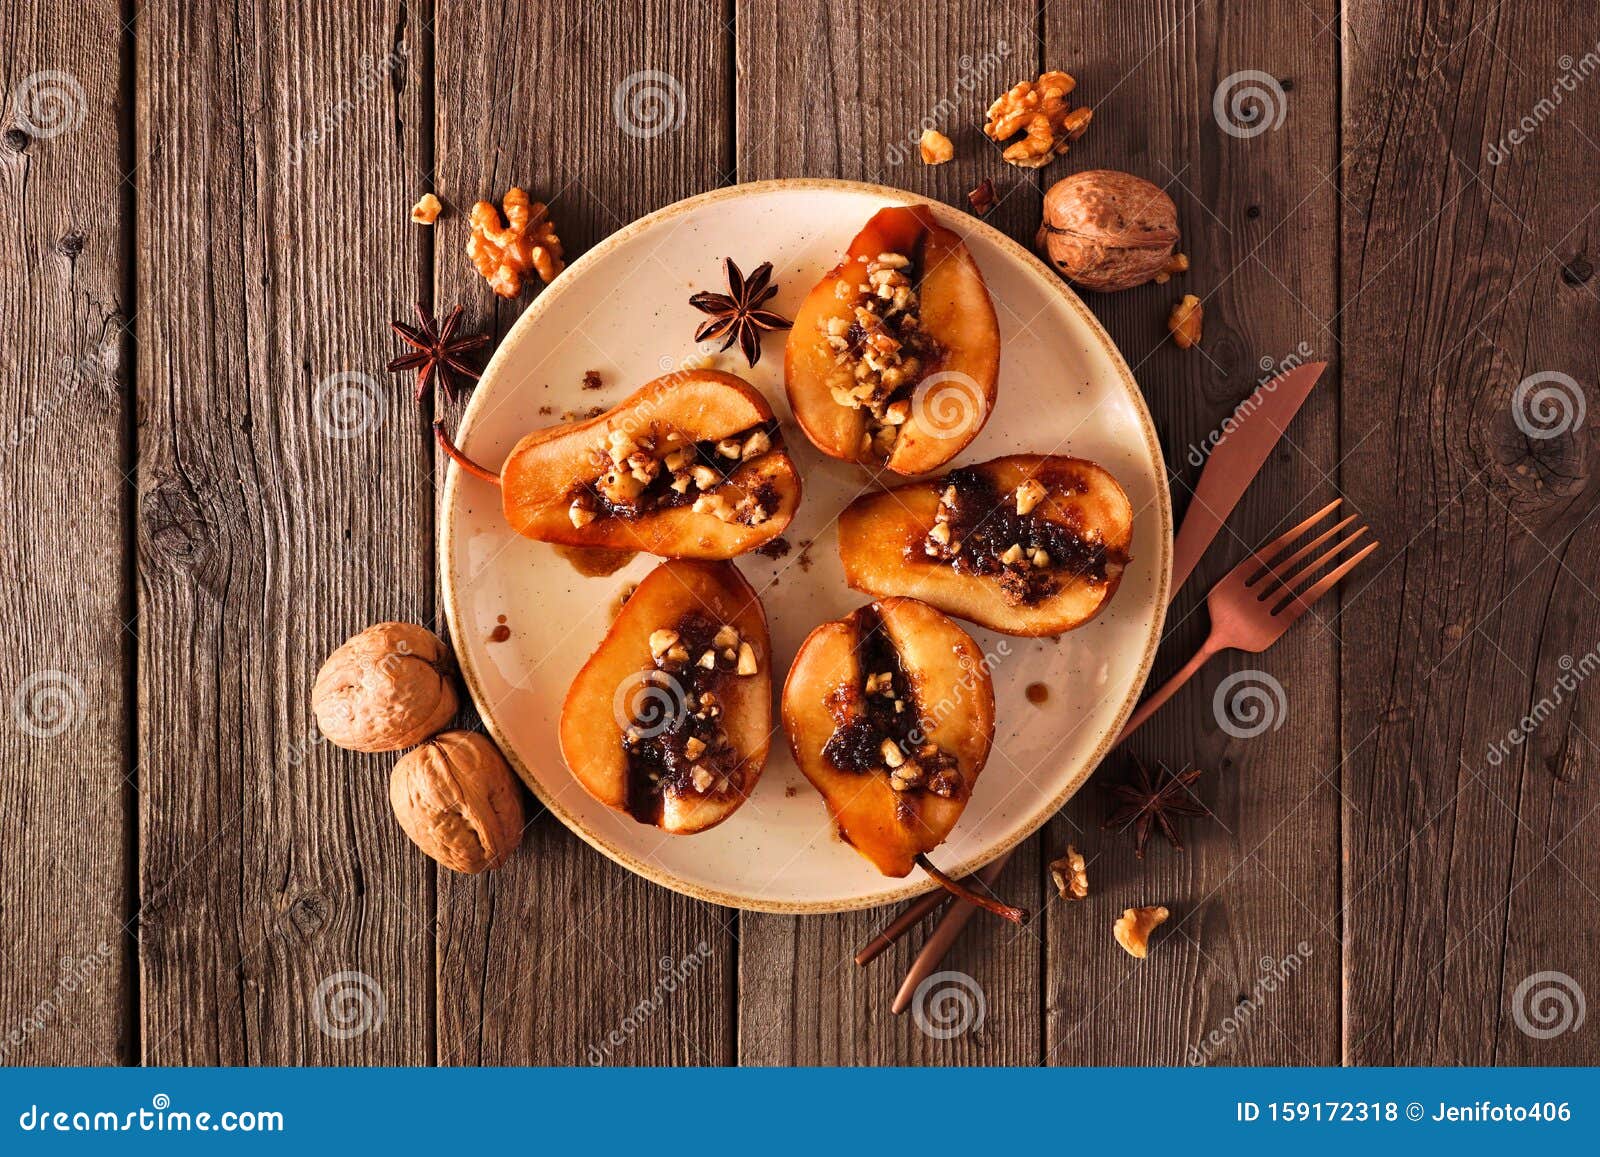 Sweet Baked Autumn Pears, Top View Over Rustic Wood with Frame of ...